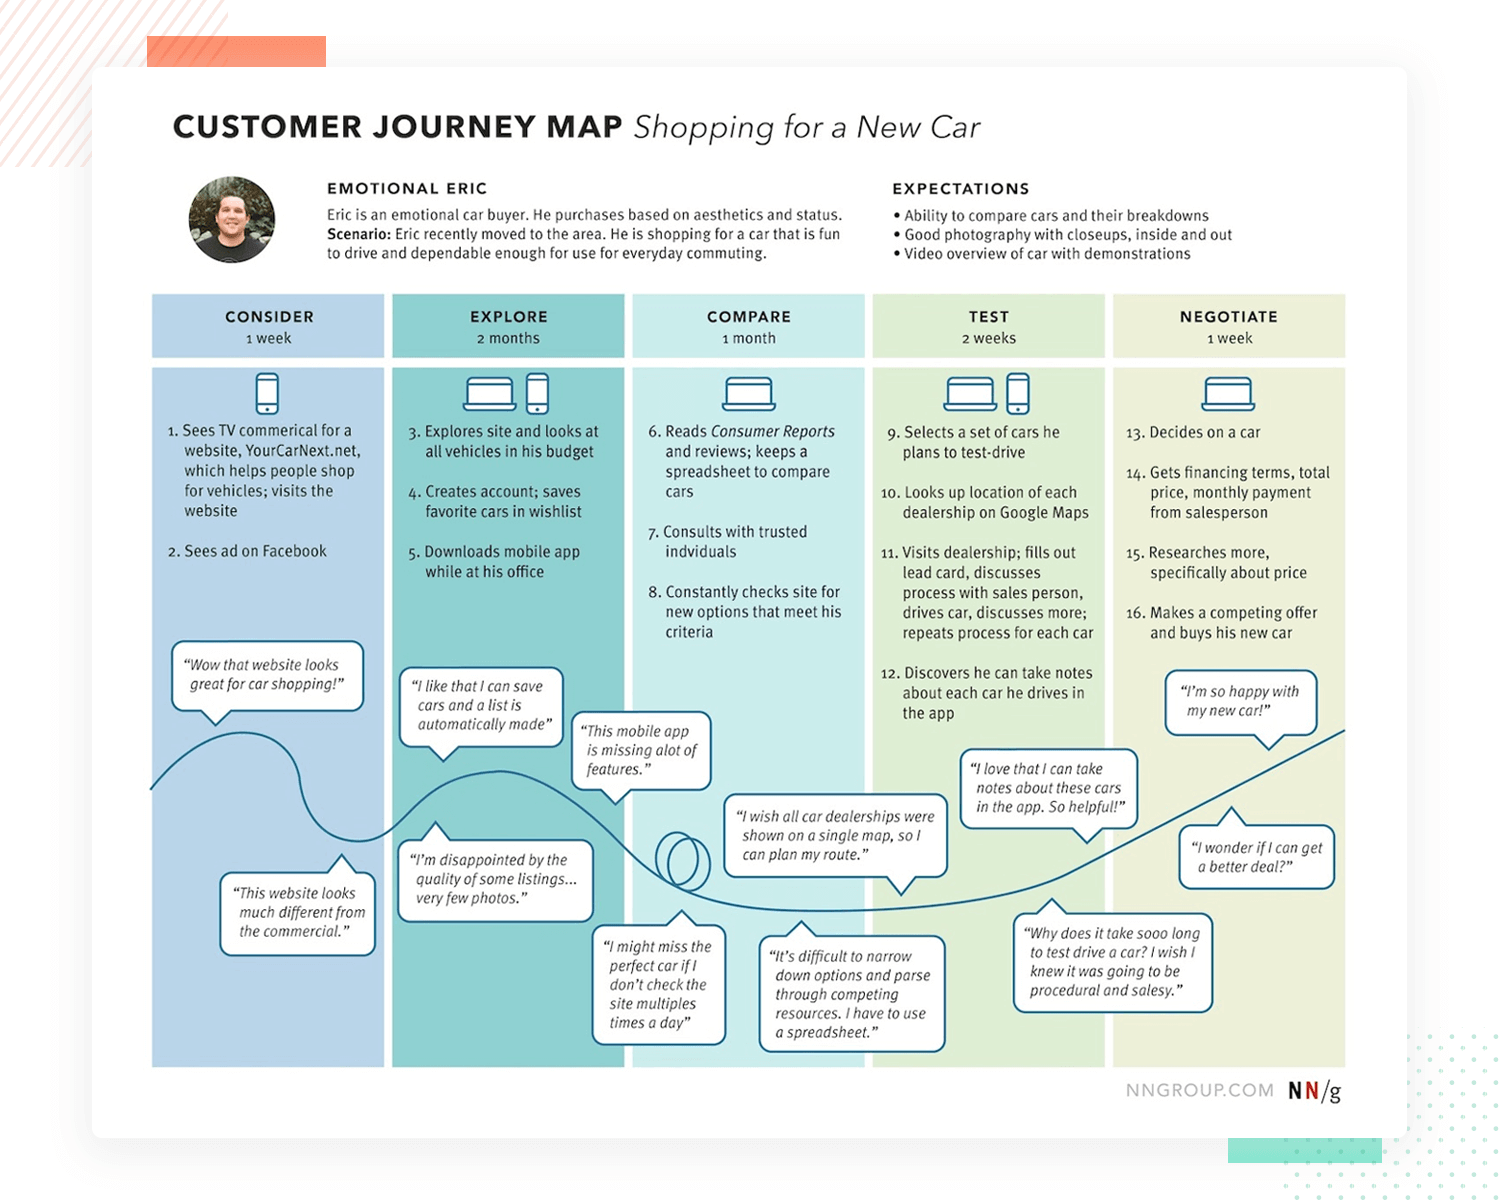 example of deliverable from requirements - user journey map